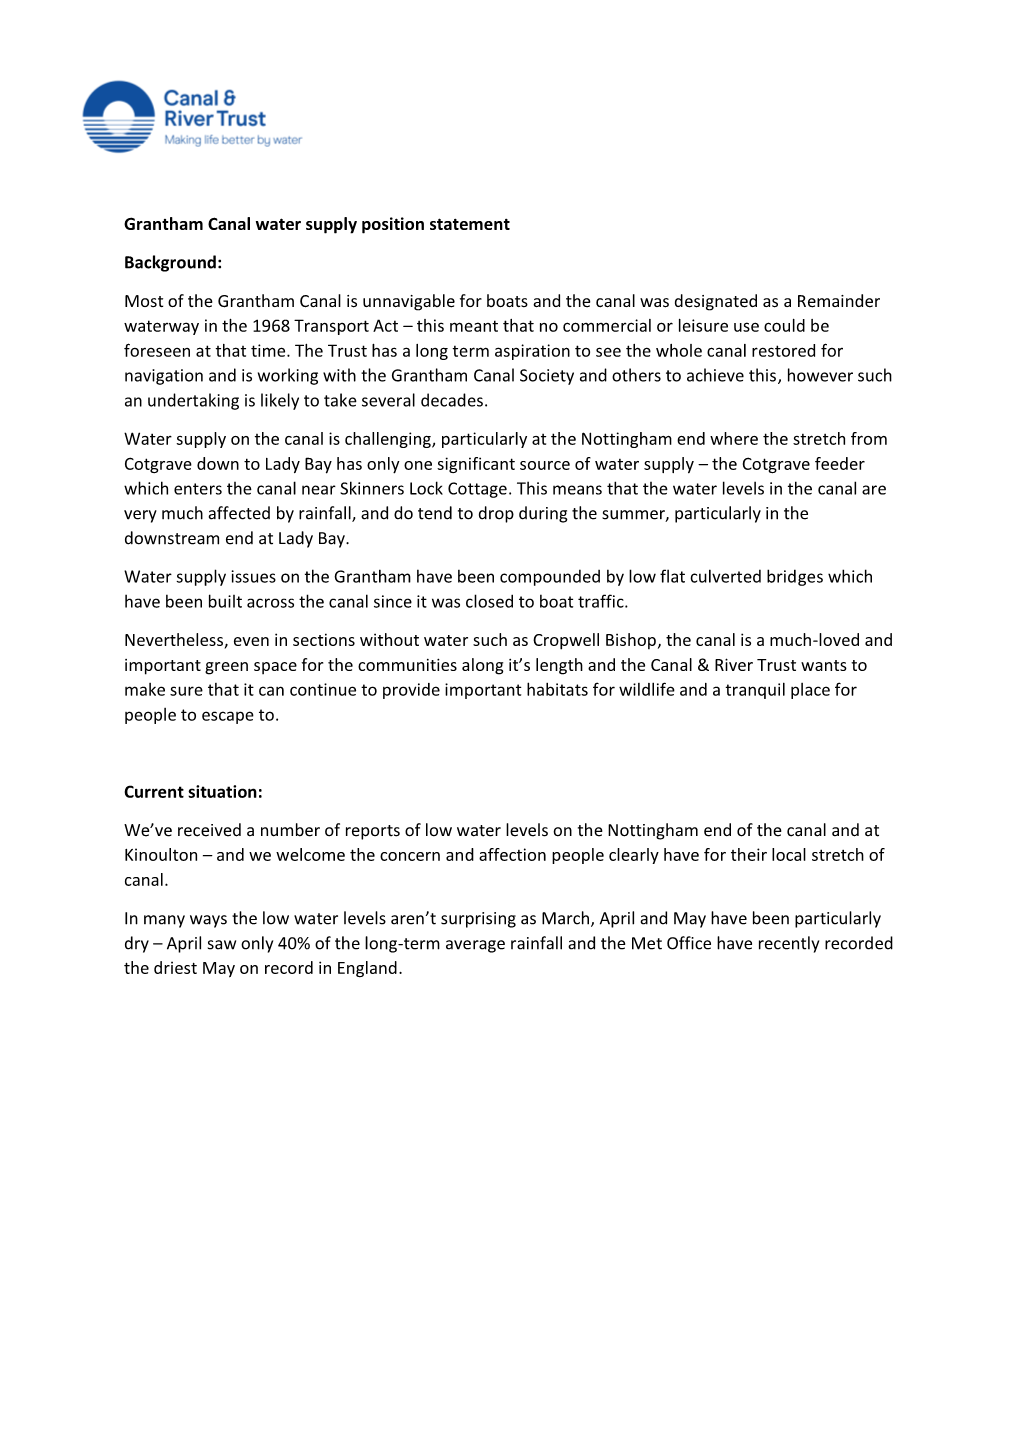 Grantham Canal Water Supply Position Statement Background: Most of The